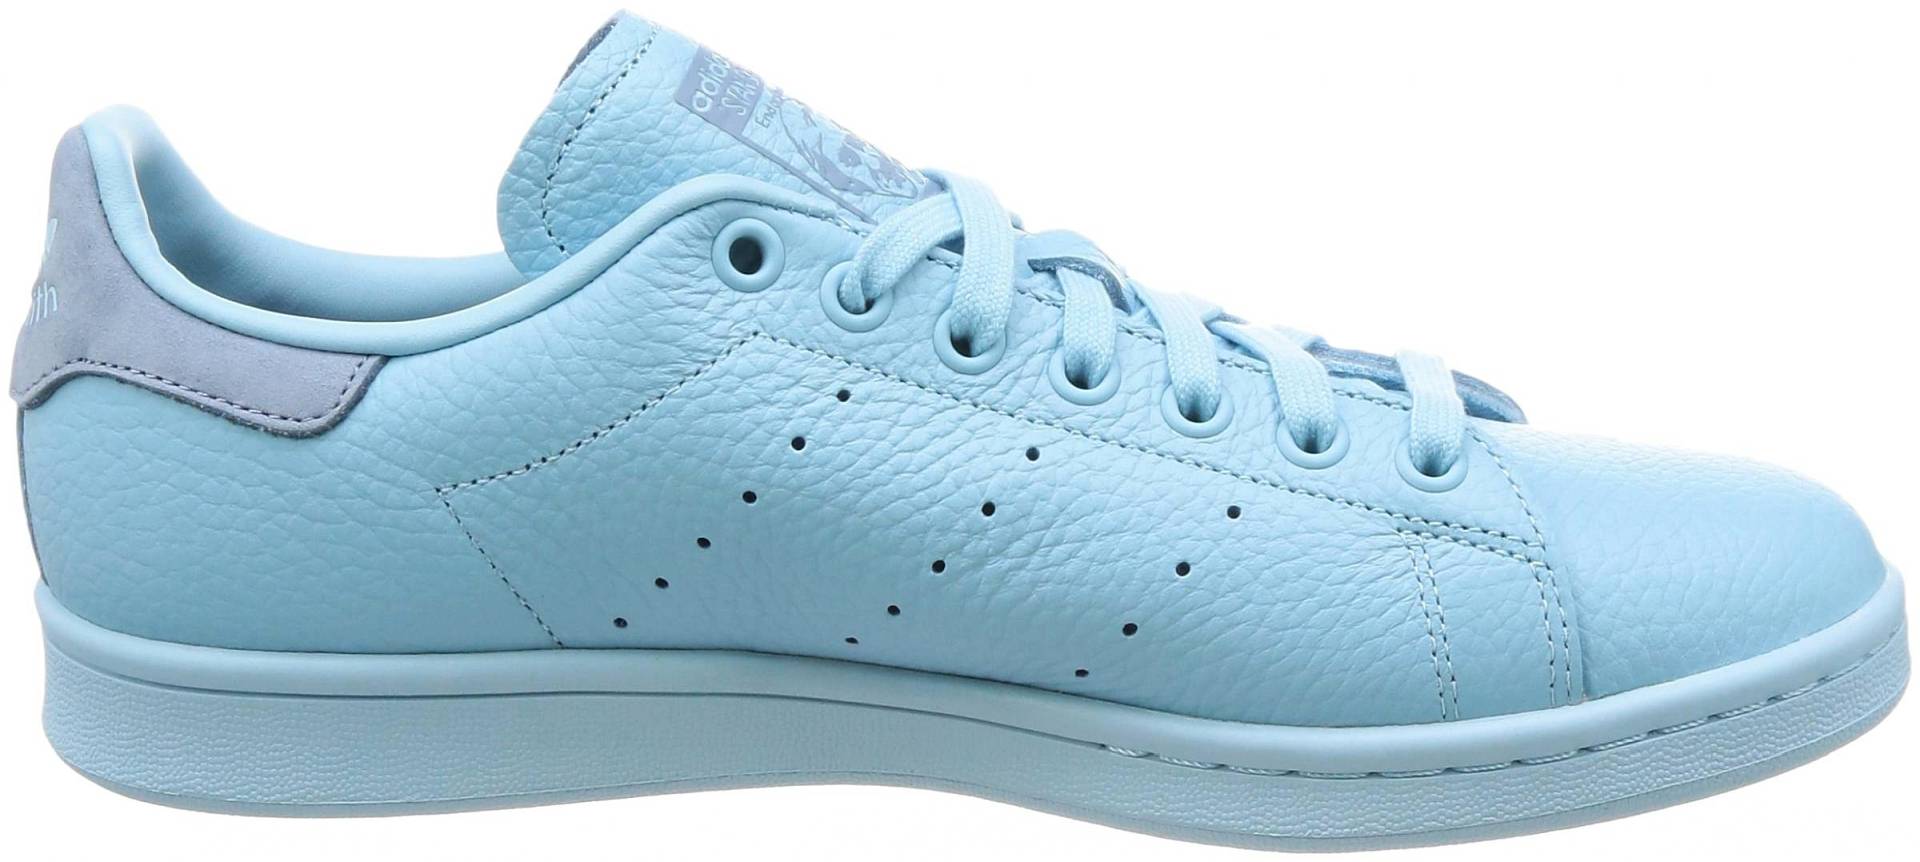 Adidas Stan Smith – Shoes Reviews & Reasons To Buy